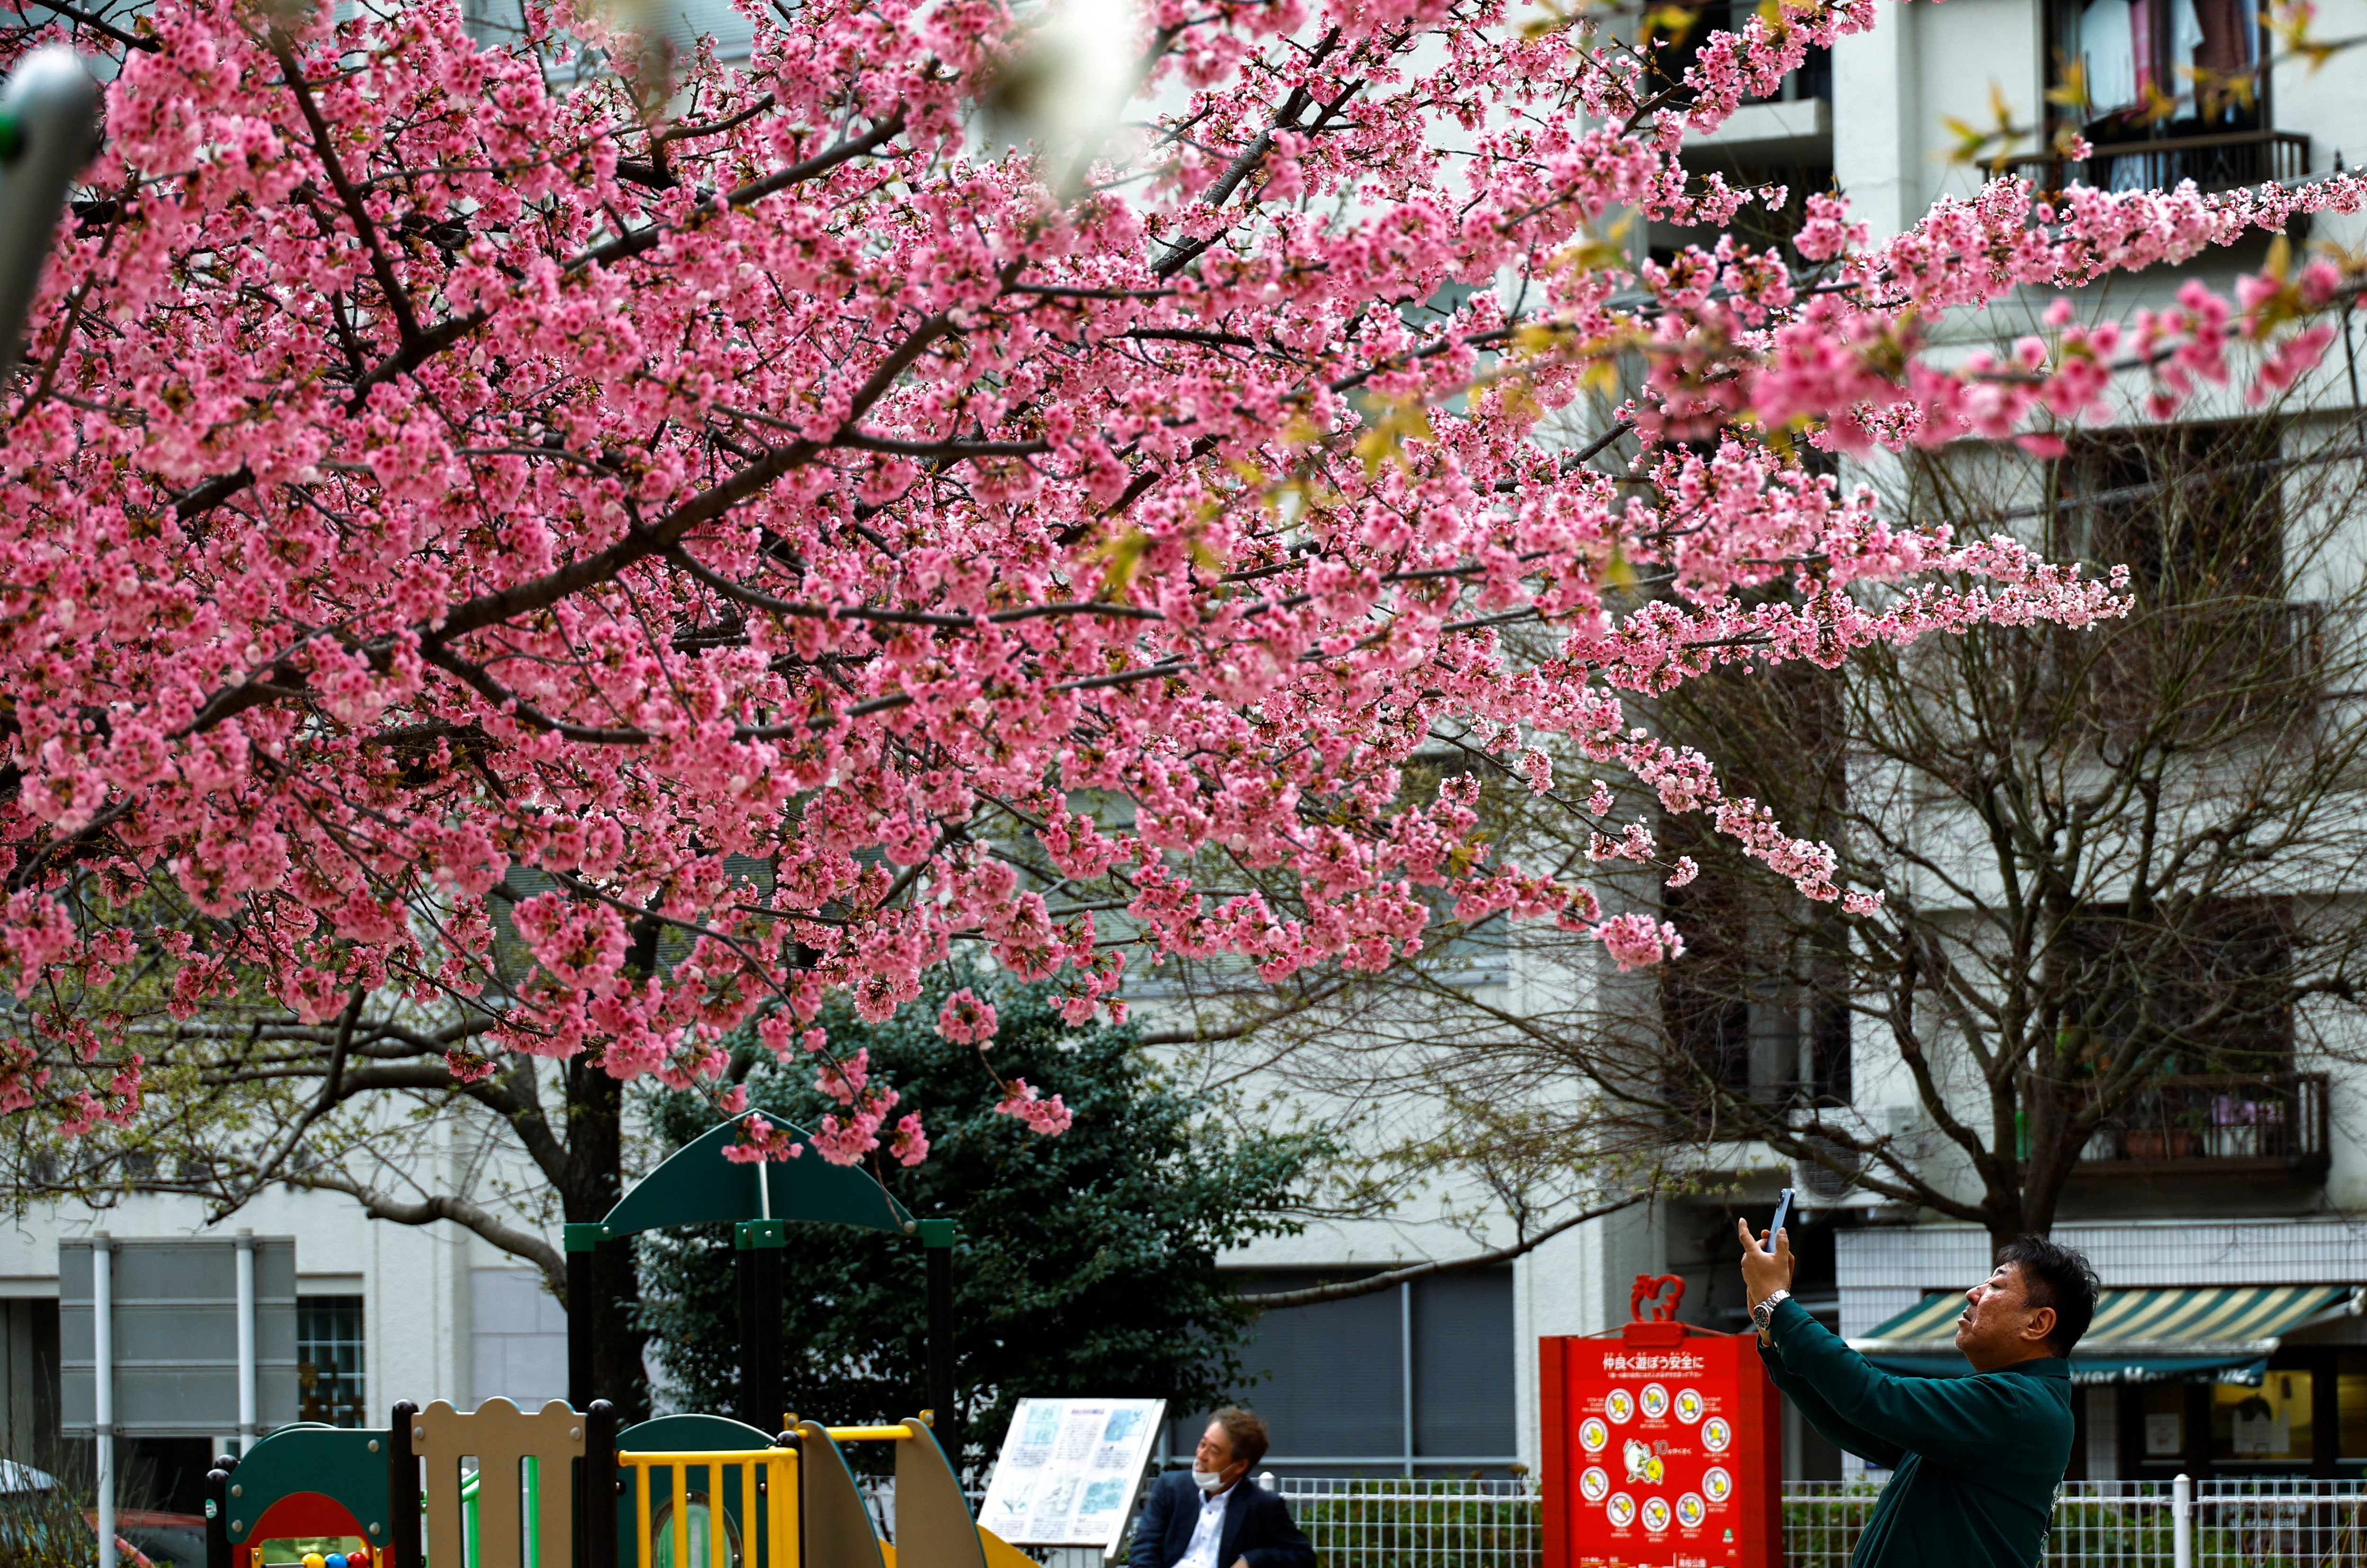 A man takes photo of cherry blossoms on the first day of the Japanese government's relaxation of official guidance on masks as it emerges from the COVID-19 pandemic, in Tokyo, Japan March 13, 2023. Photo: Reuters